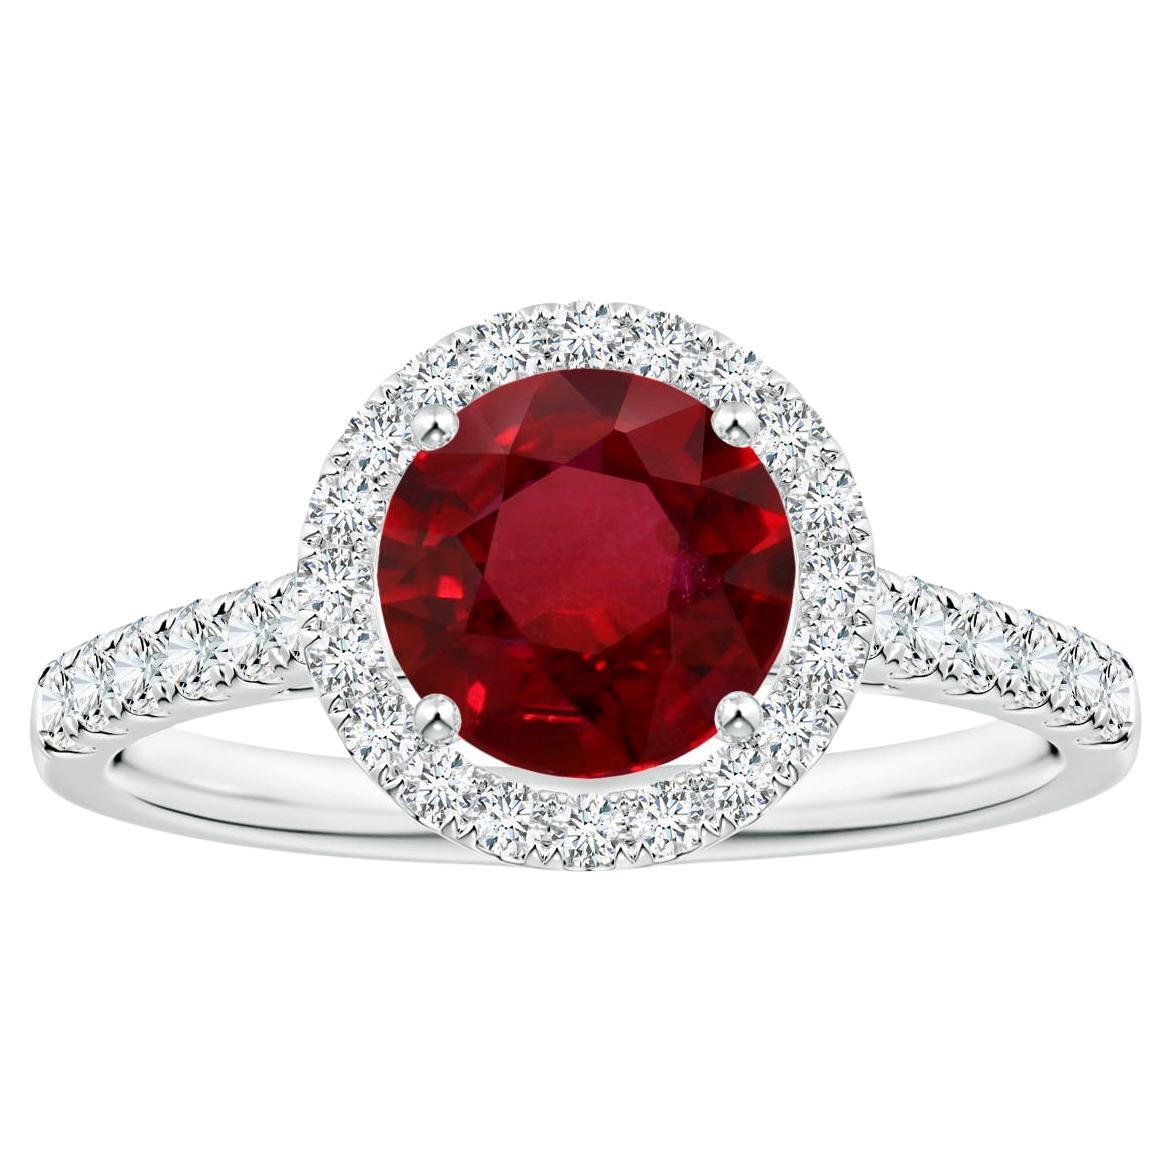 ANGARA GIA Certified Natural 1.54ct Ruby Halo Ring with Diamond in Platinum